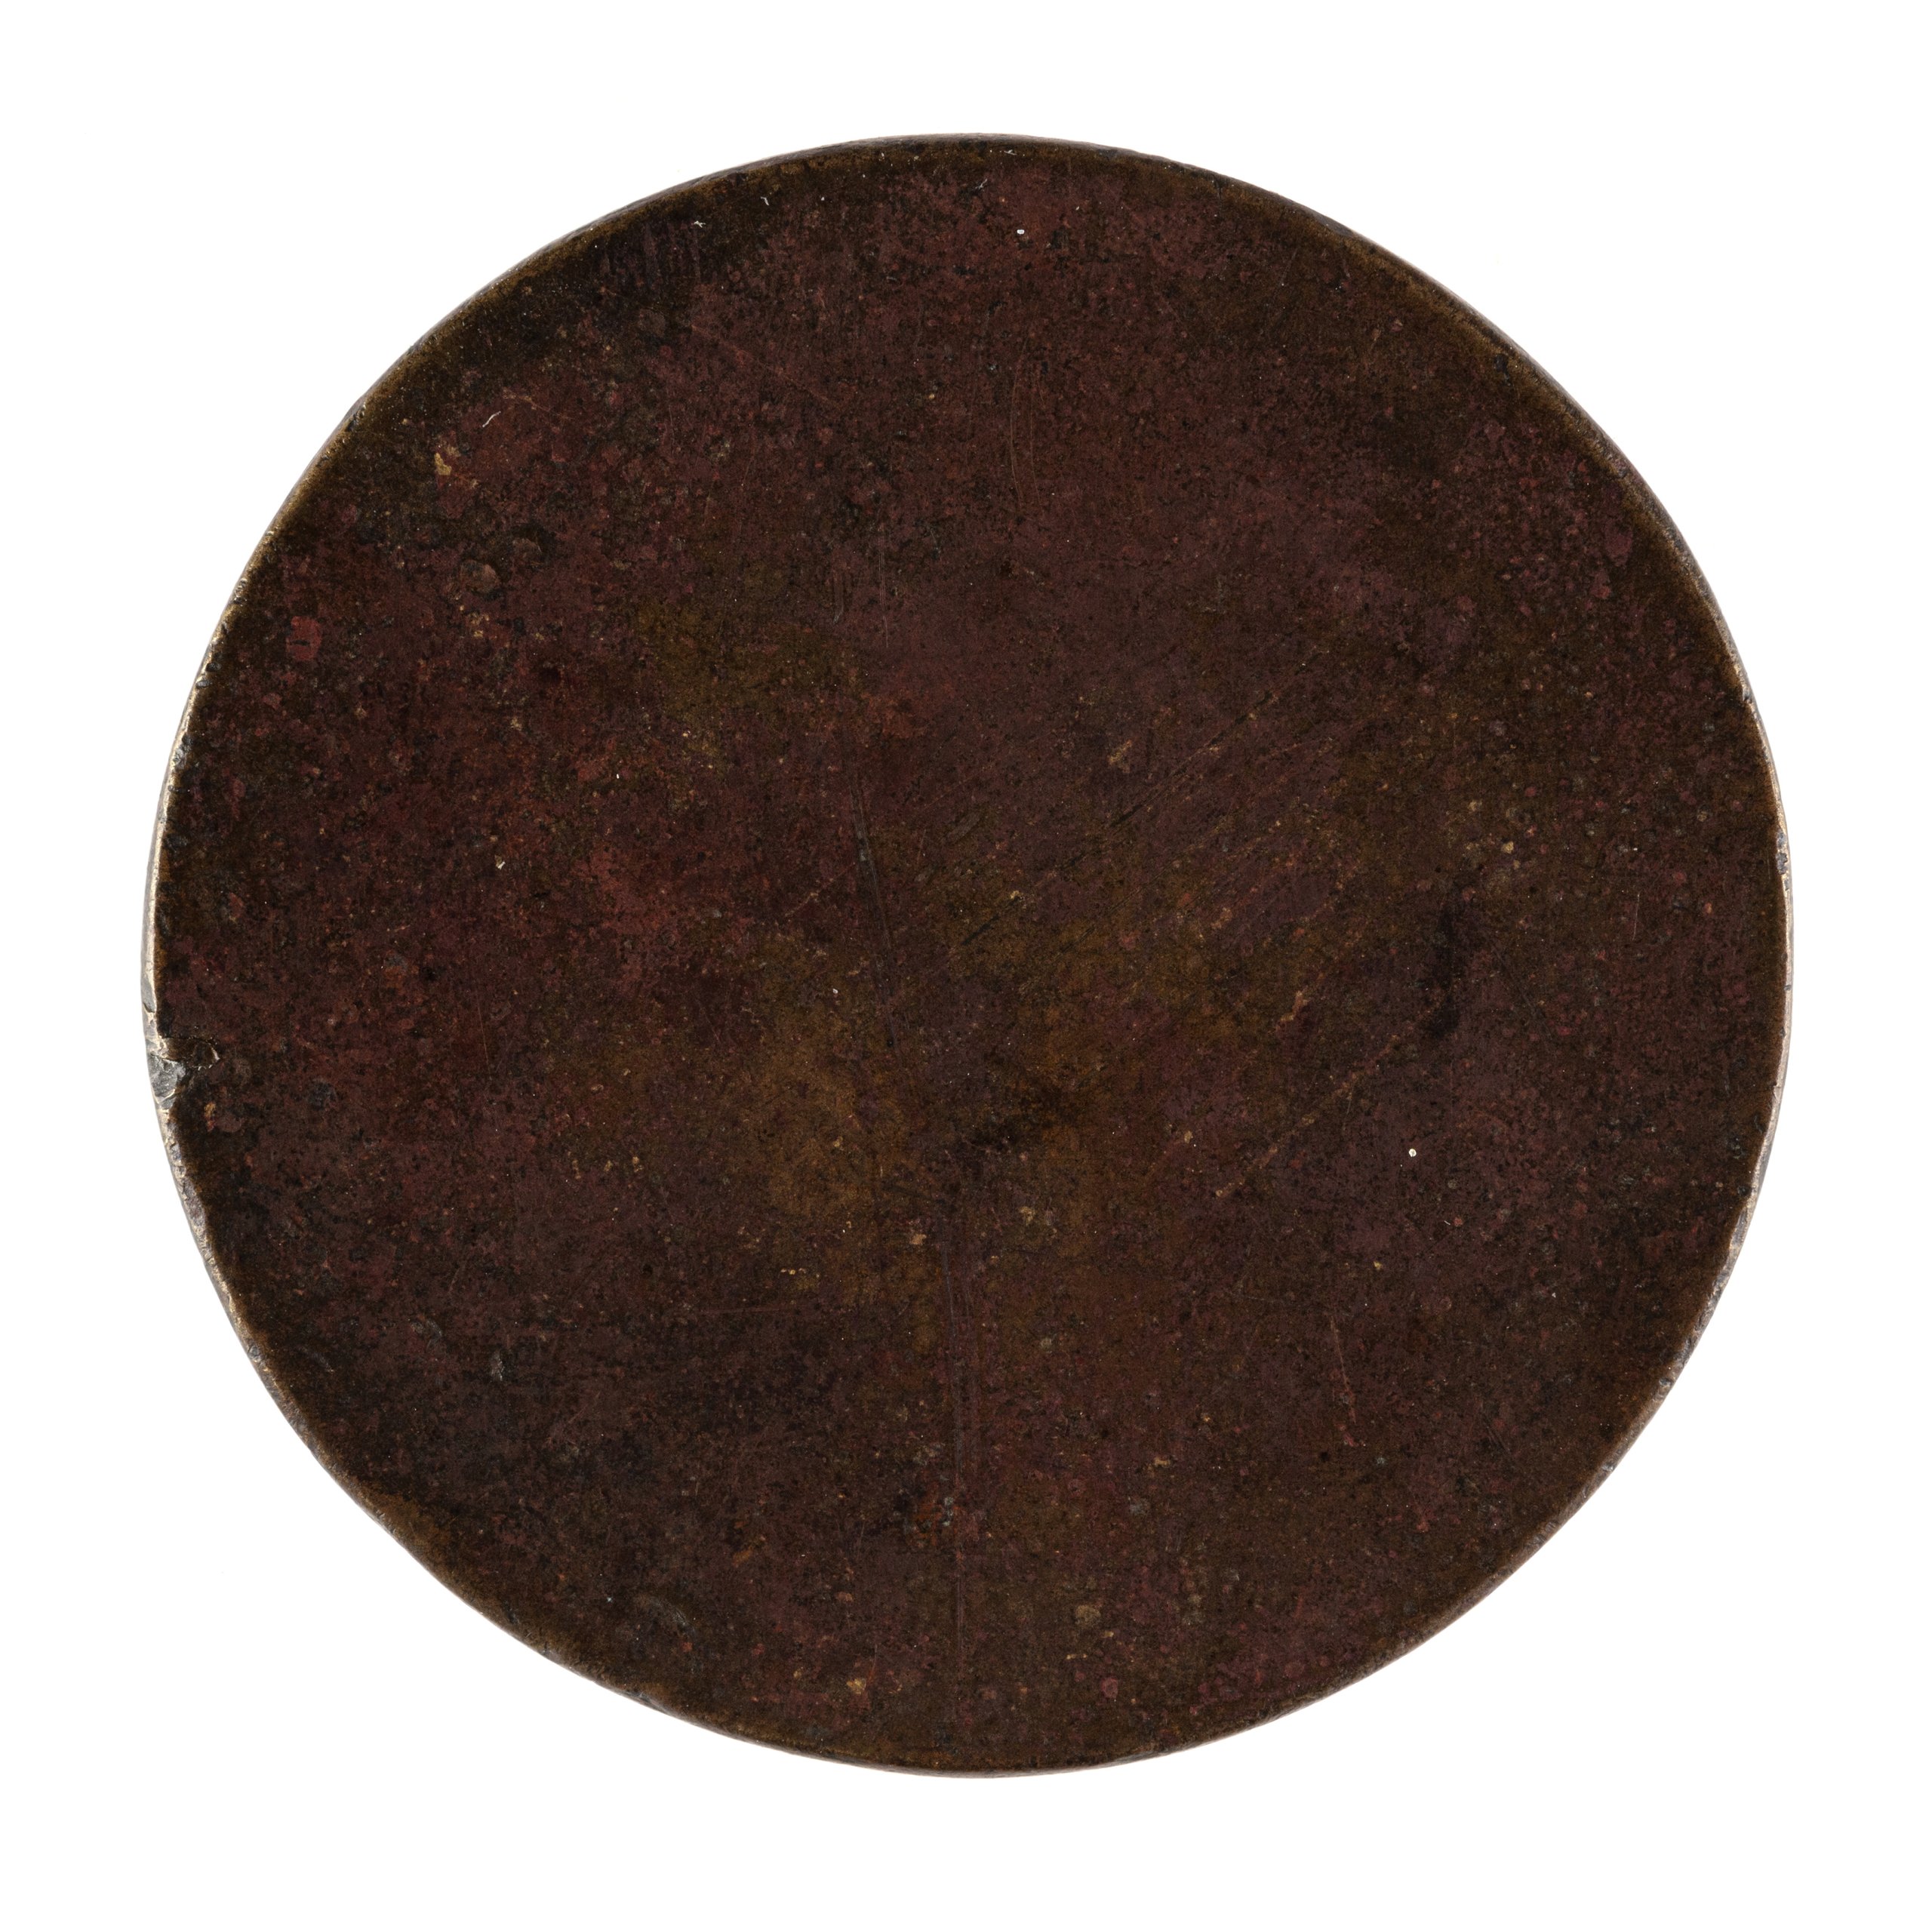 Australian convict token from the Colony of New South Wales